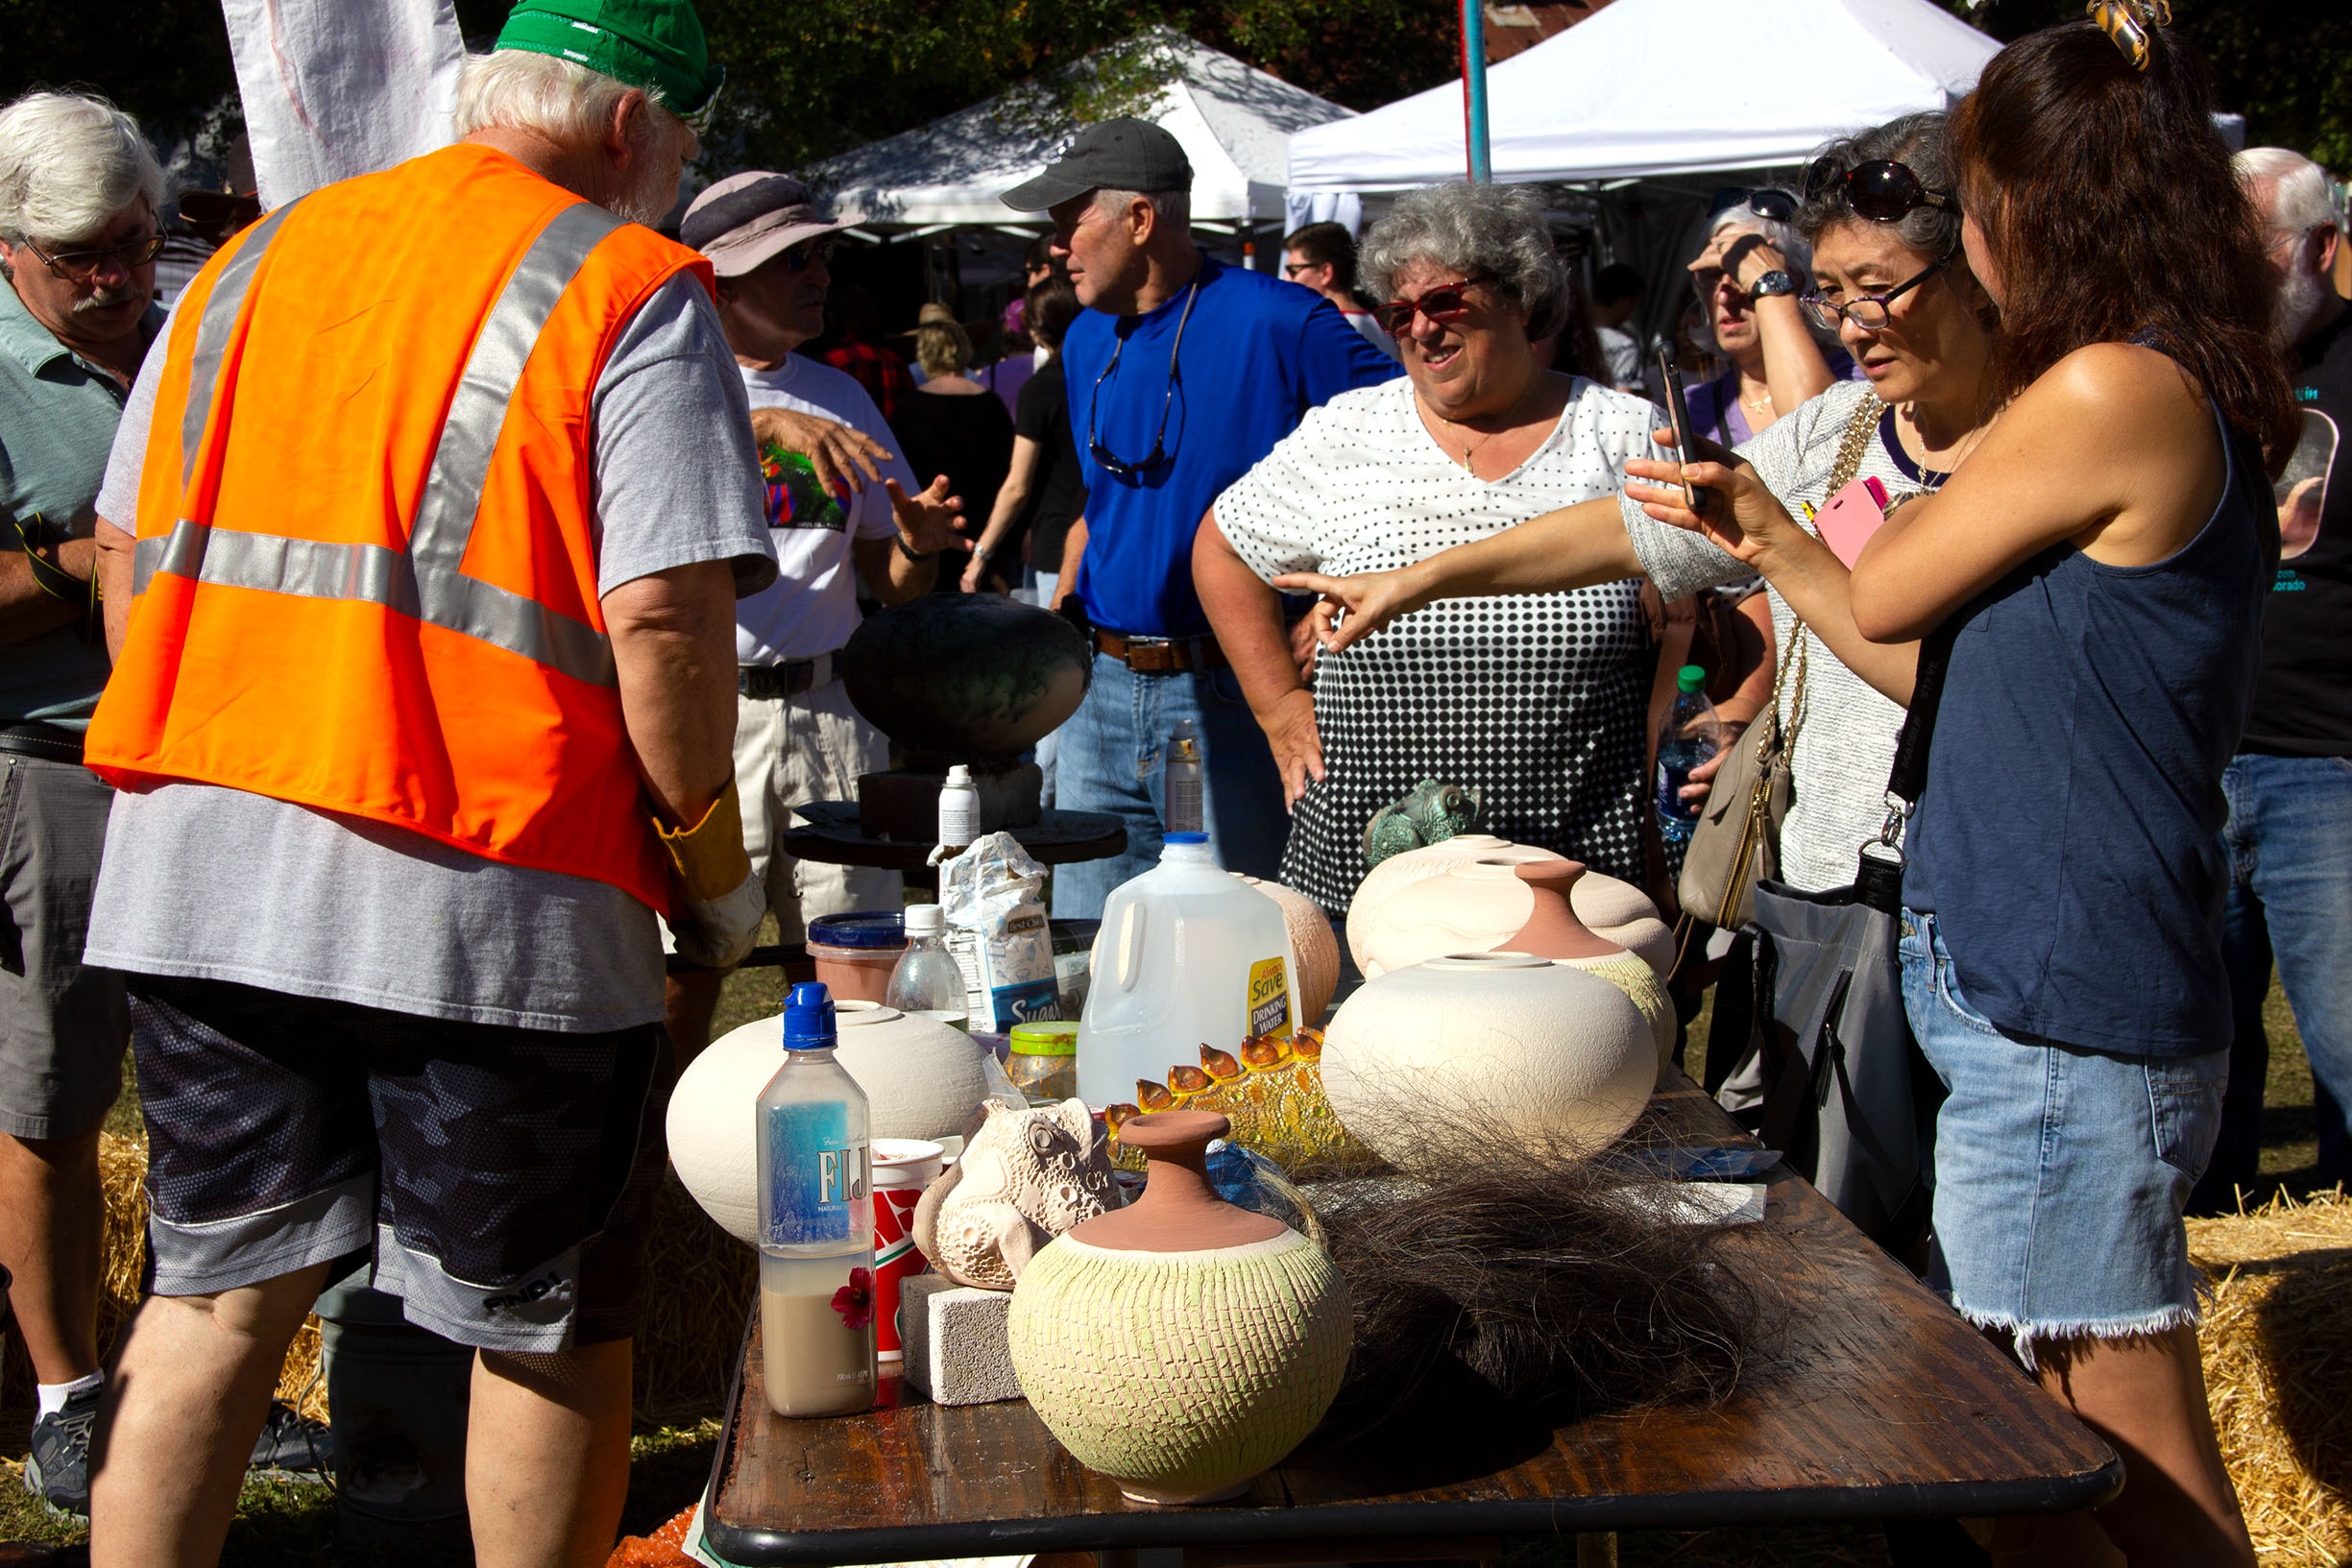 PHOTO: rodnax, in the reflective vest, gave several firing demos in the center of the festival. Across the table laid ready-to-fire ceramic piece as well as specials glazes and horse hair. Photo by The Signal Online Editor Alyssa Shotwell.